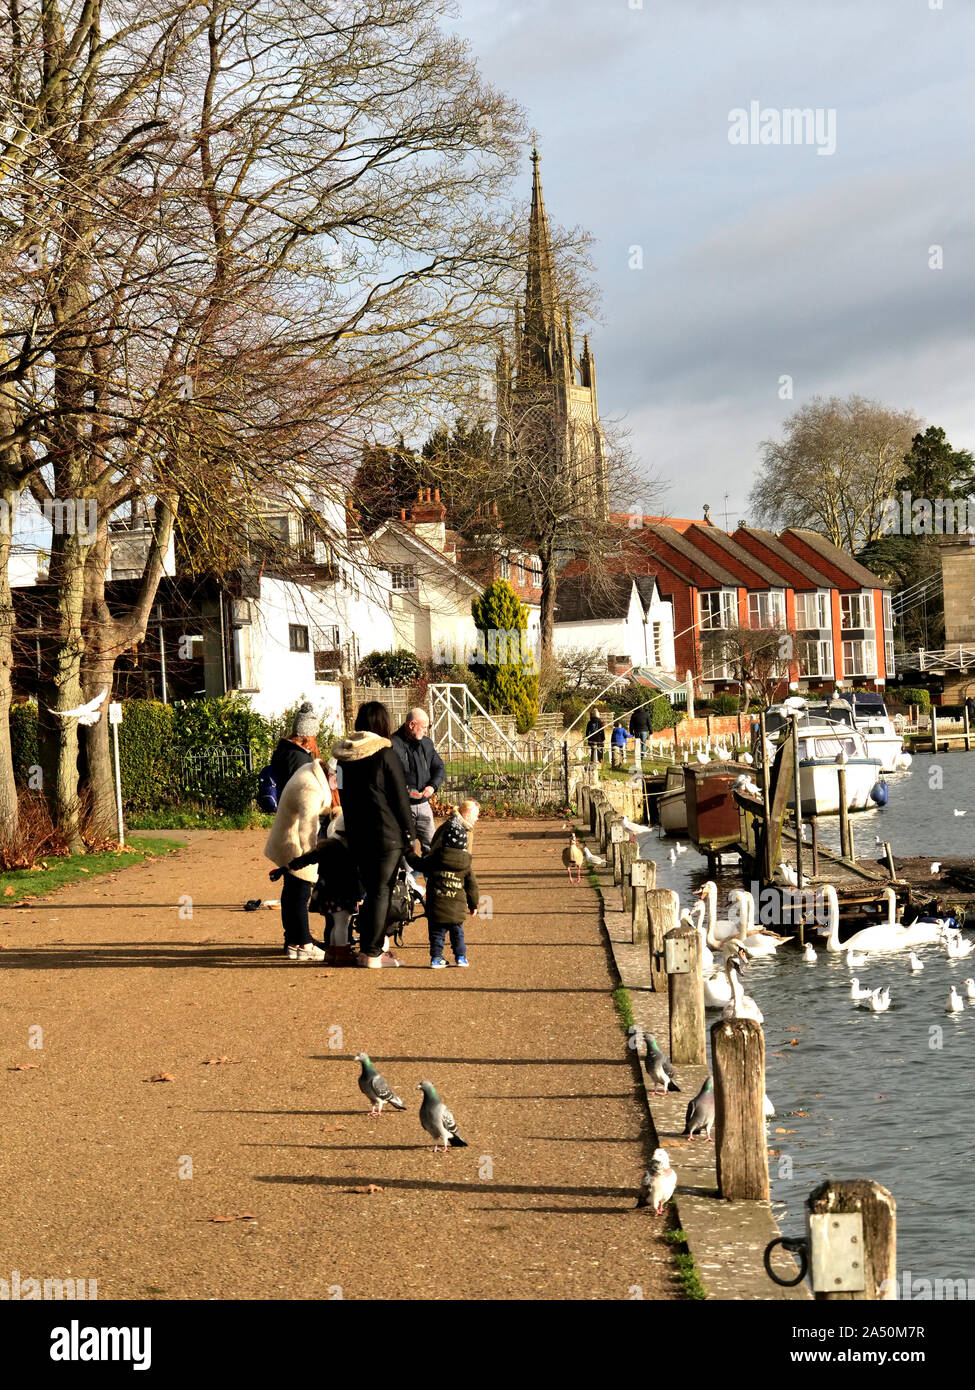 Waterside scene at Windsor Bridge with the Church of St John The Baptist, High Street, in the background Stock Photo